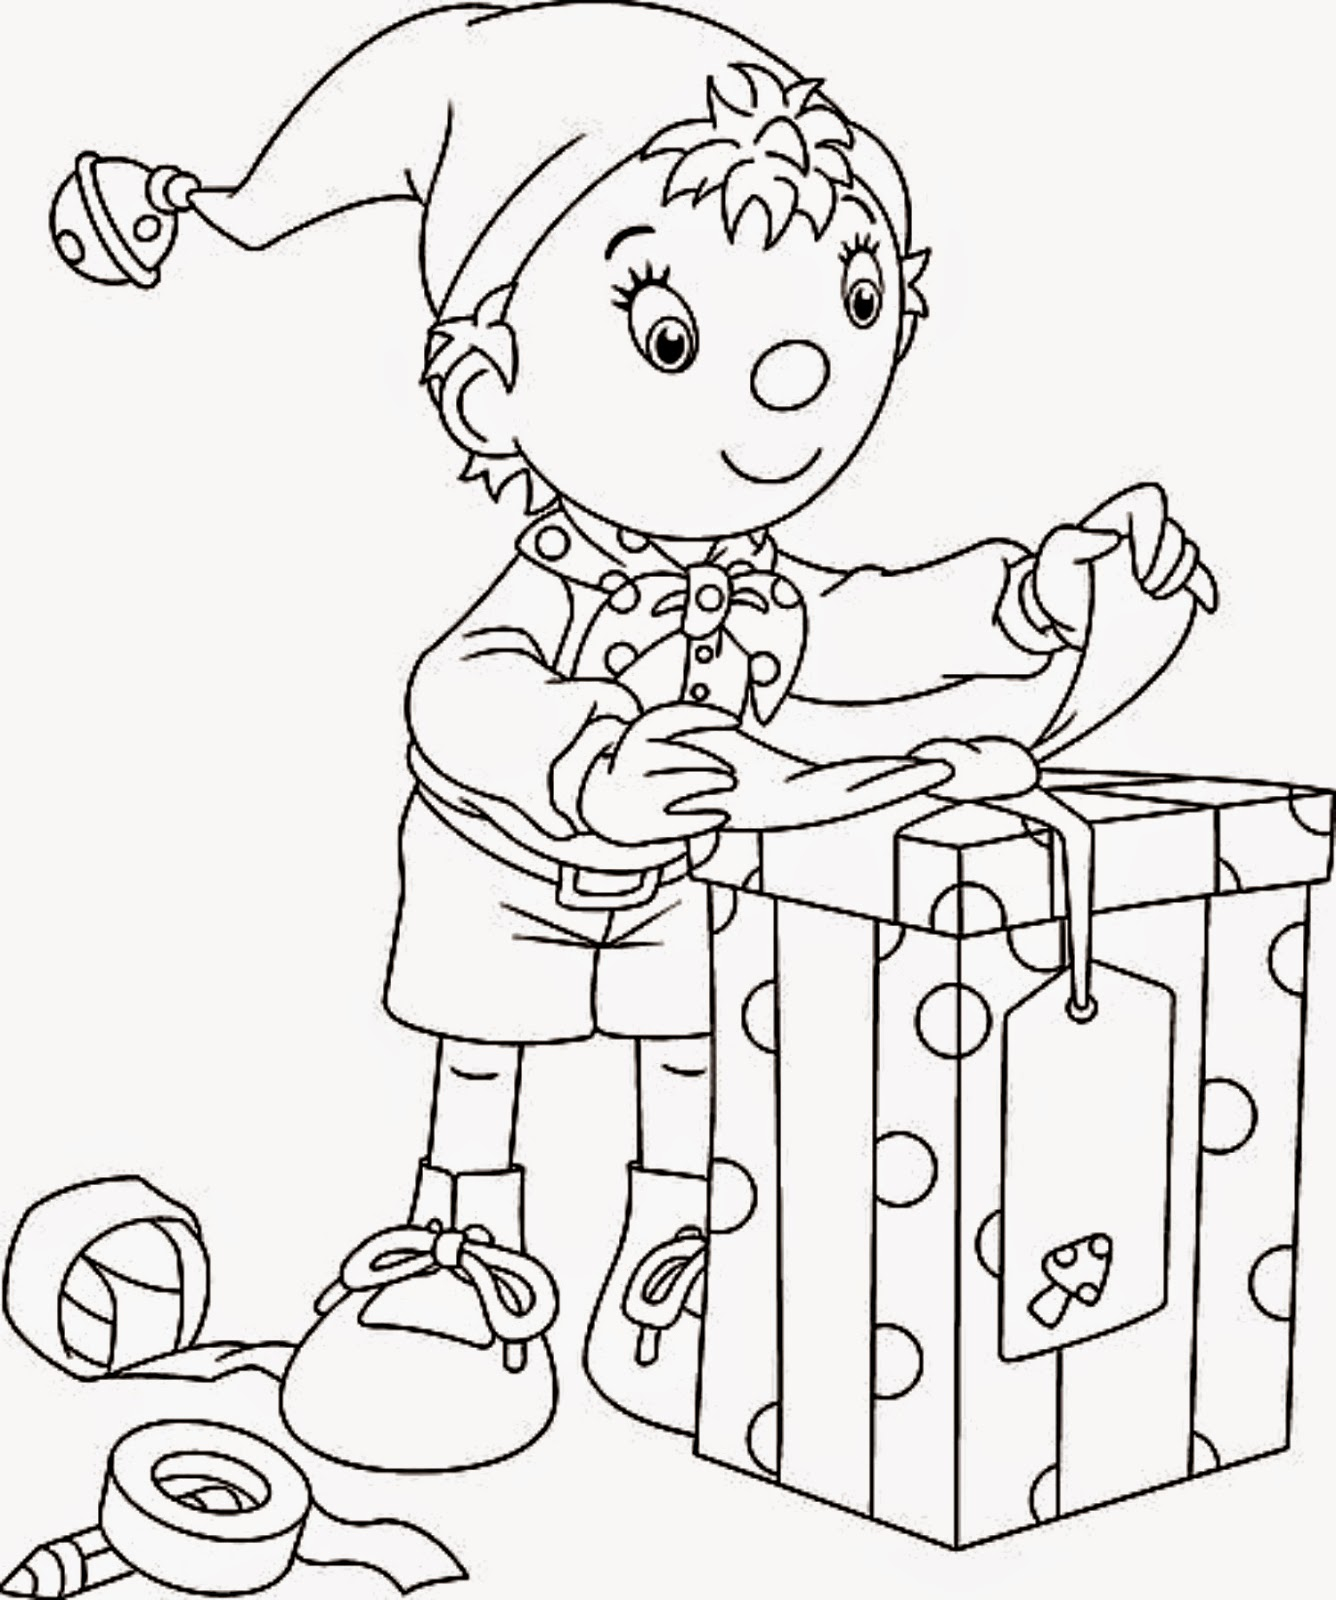 Christmas Elf Coloring Pages Coloring Pages Christmas Elf Coloring Pages Free And Printable